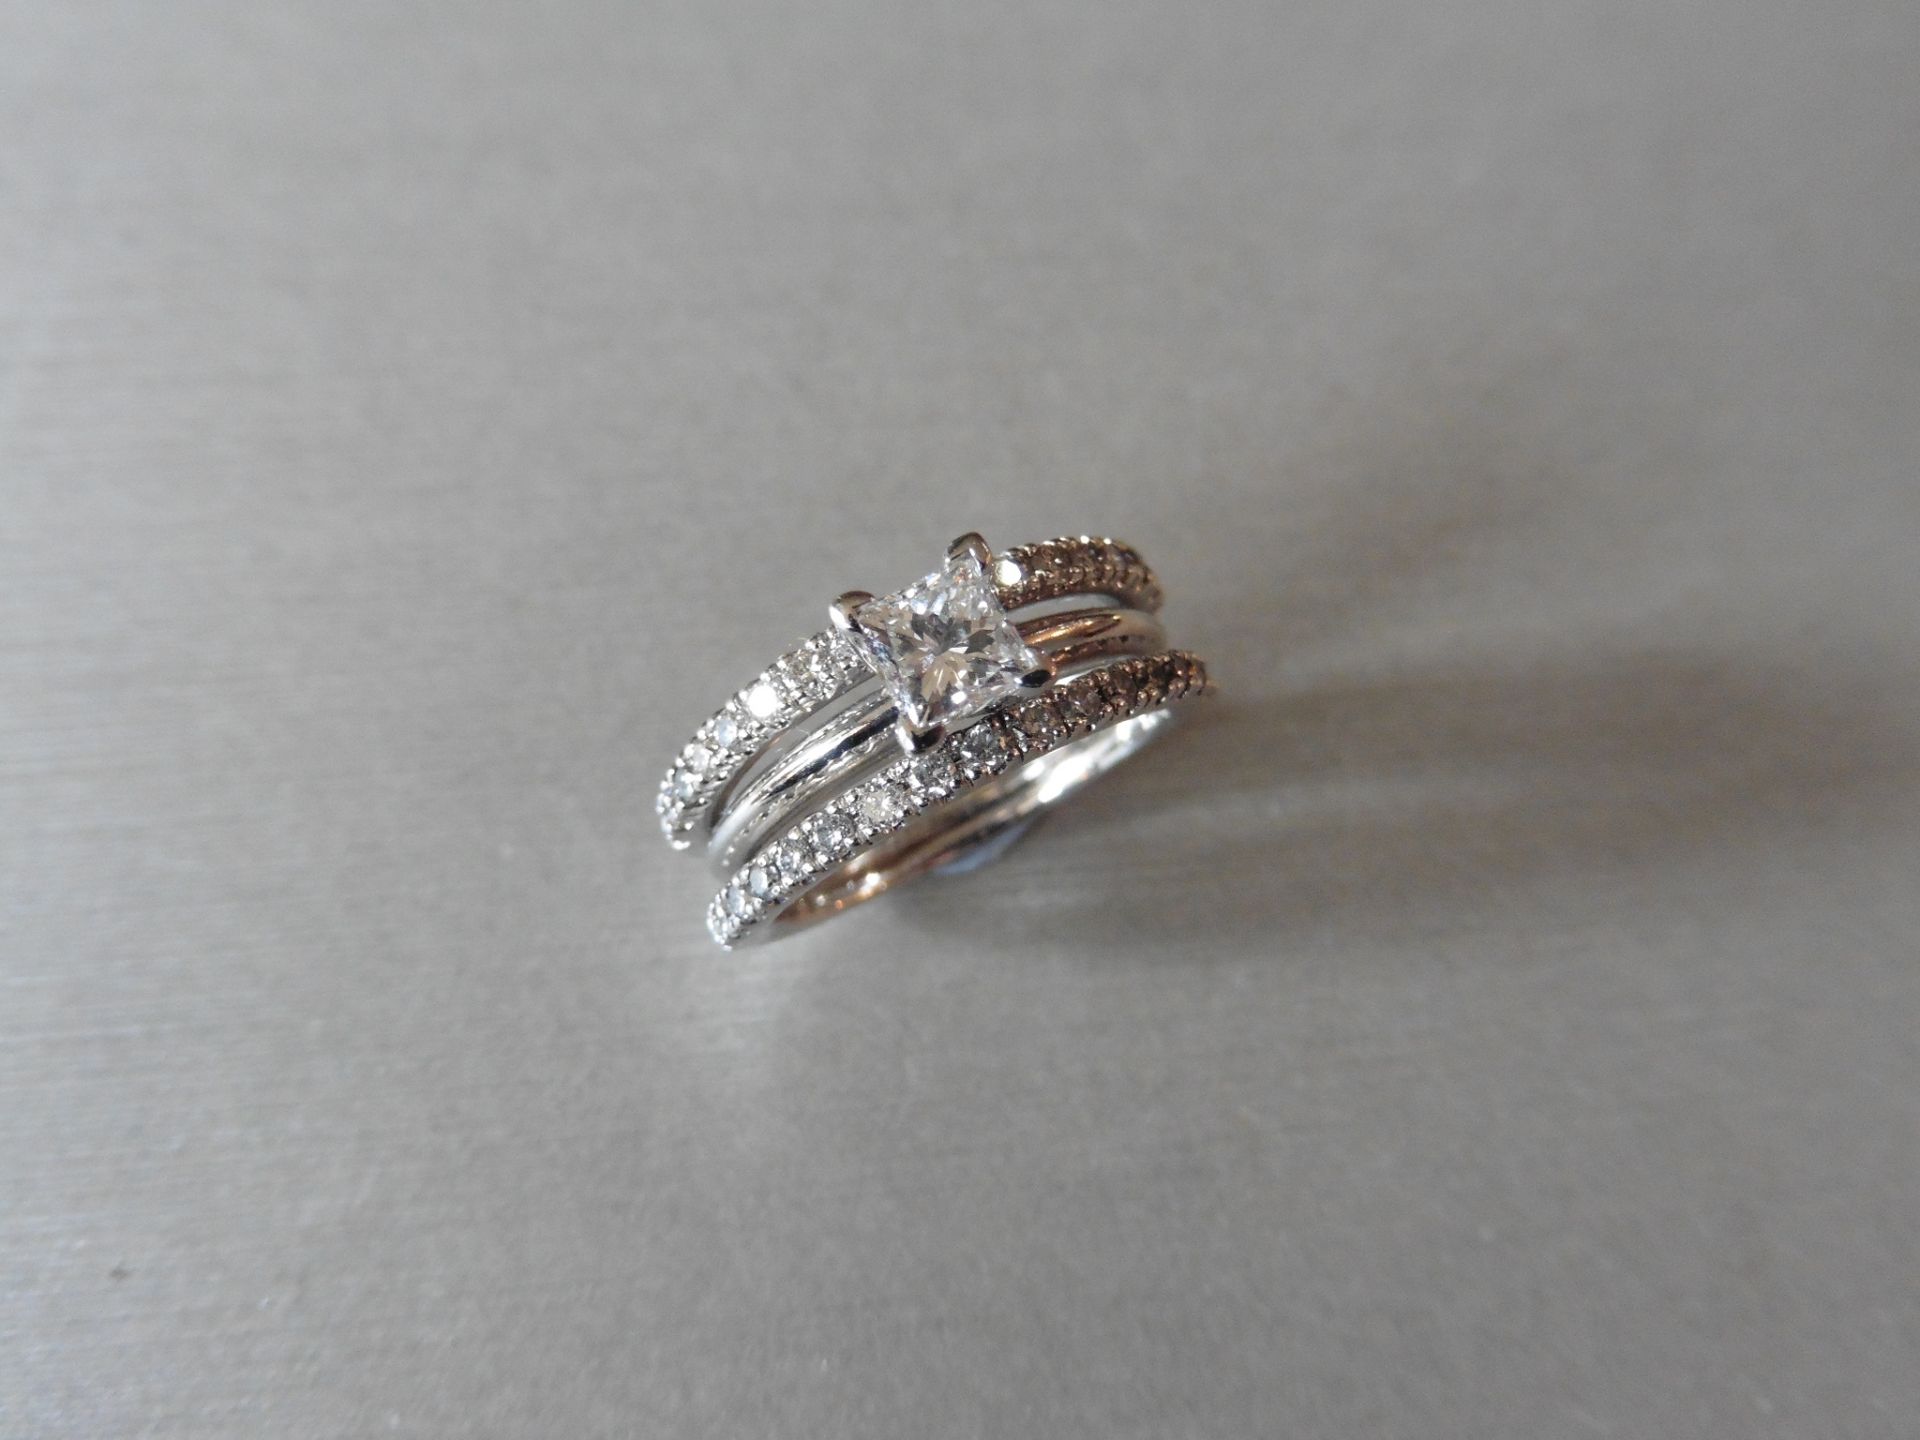 14ct white gold ring set. This is 3 rings that have been joined together compromising of 2 diamond